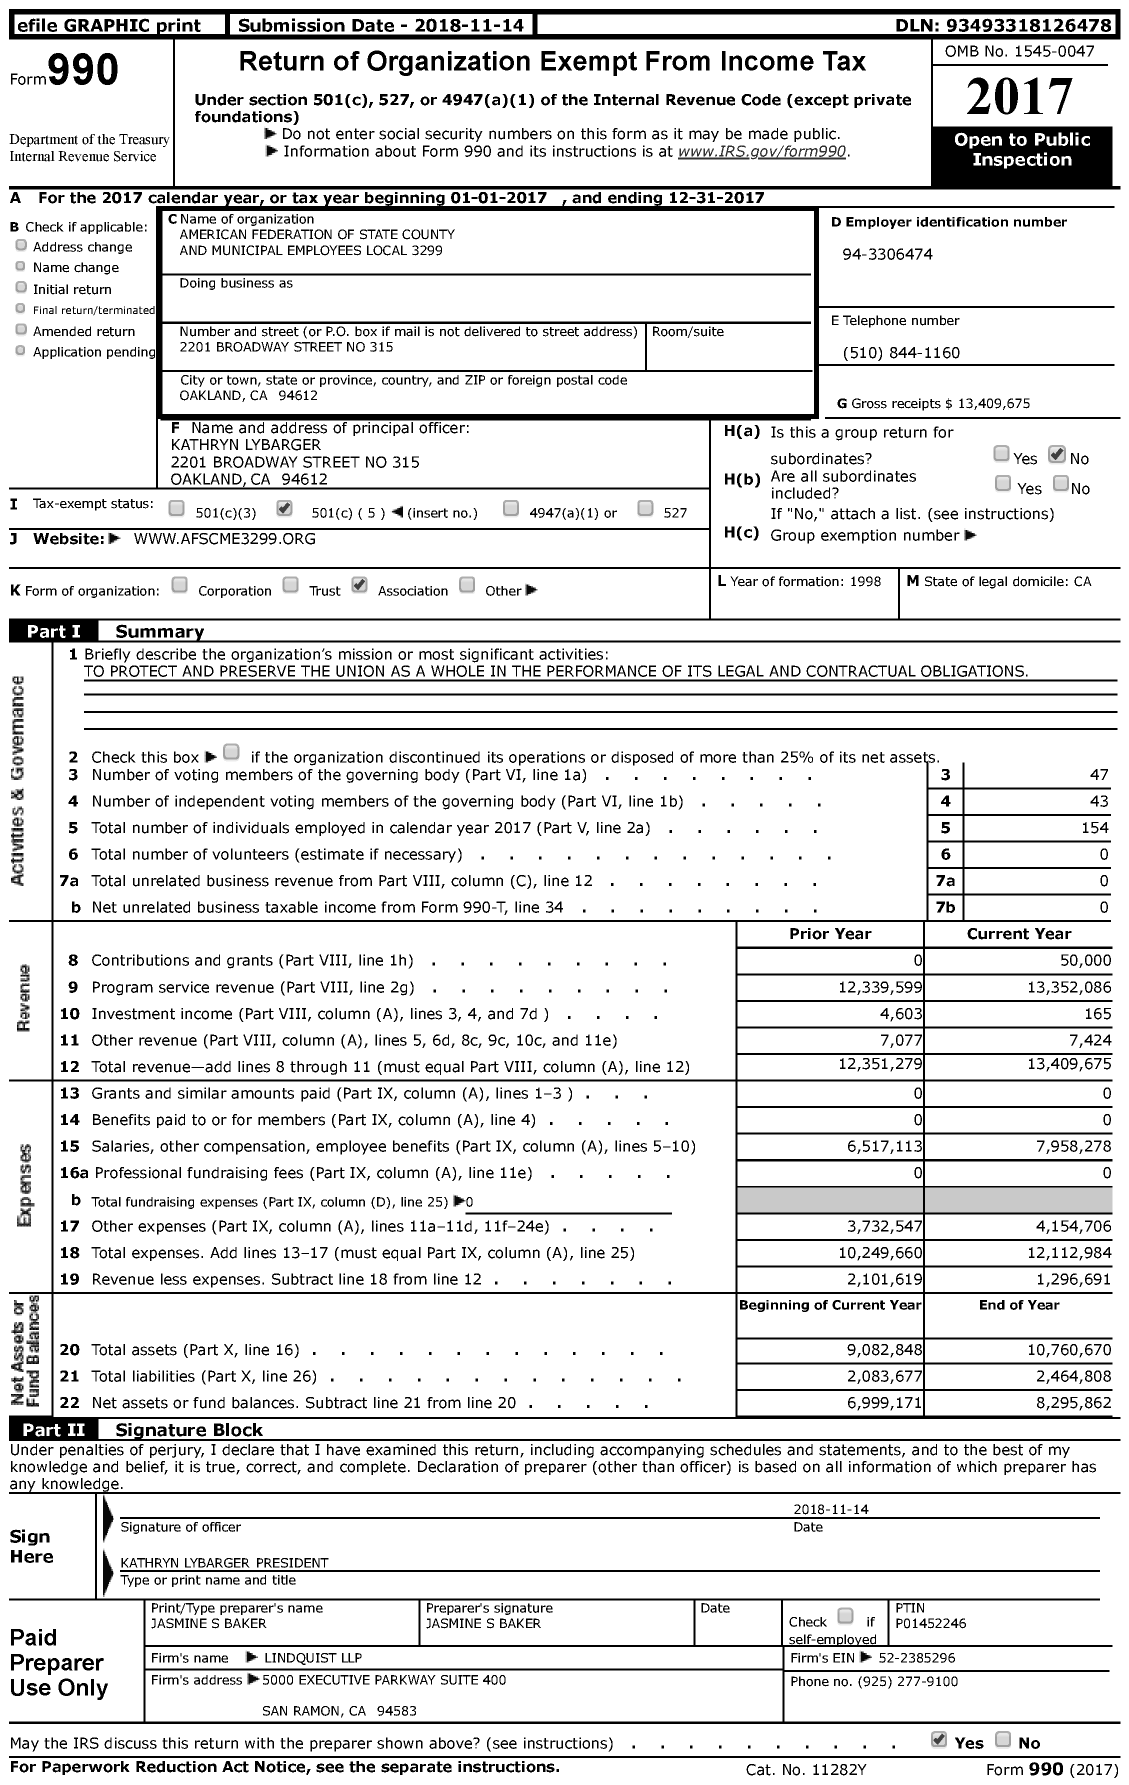 Image of first page of 2017 Form 990 for American Federation of State County & MUNICIPAL EMPLOYEES - L3299ca Univ of California Employee